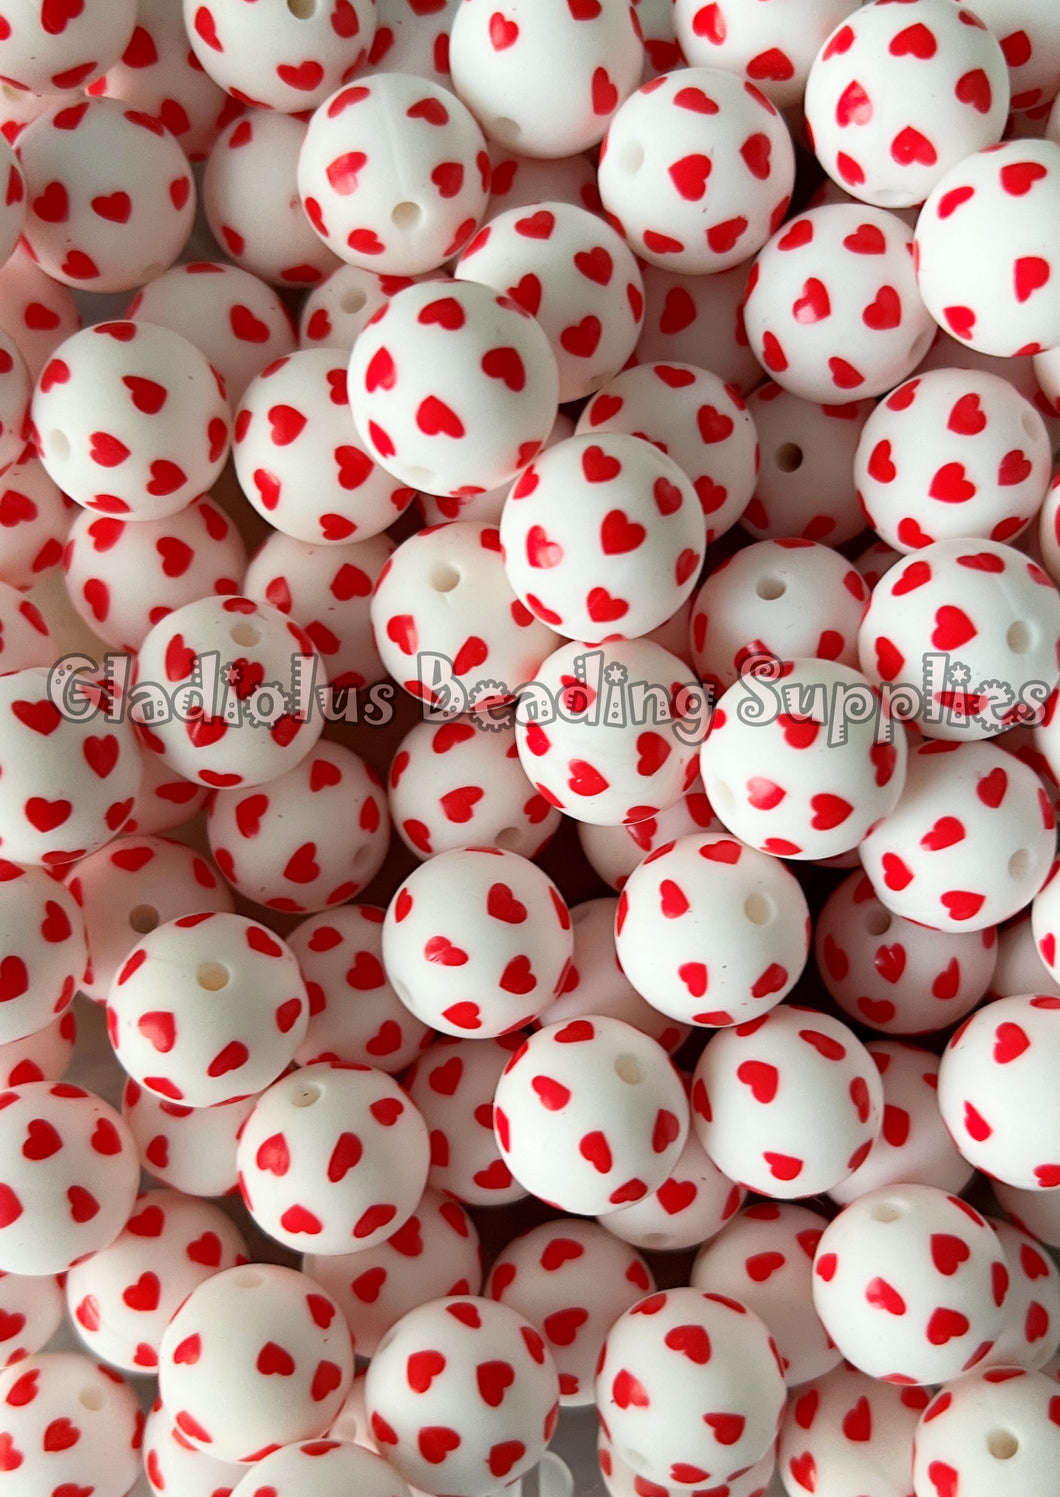 15mm Heart Print Silicone Bead, Loose Beads, Valentine's Day Beads